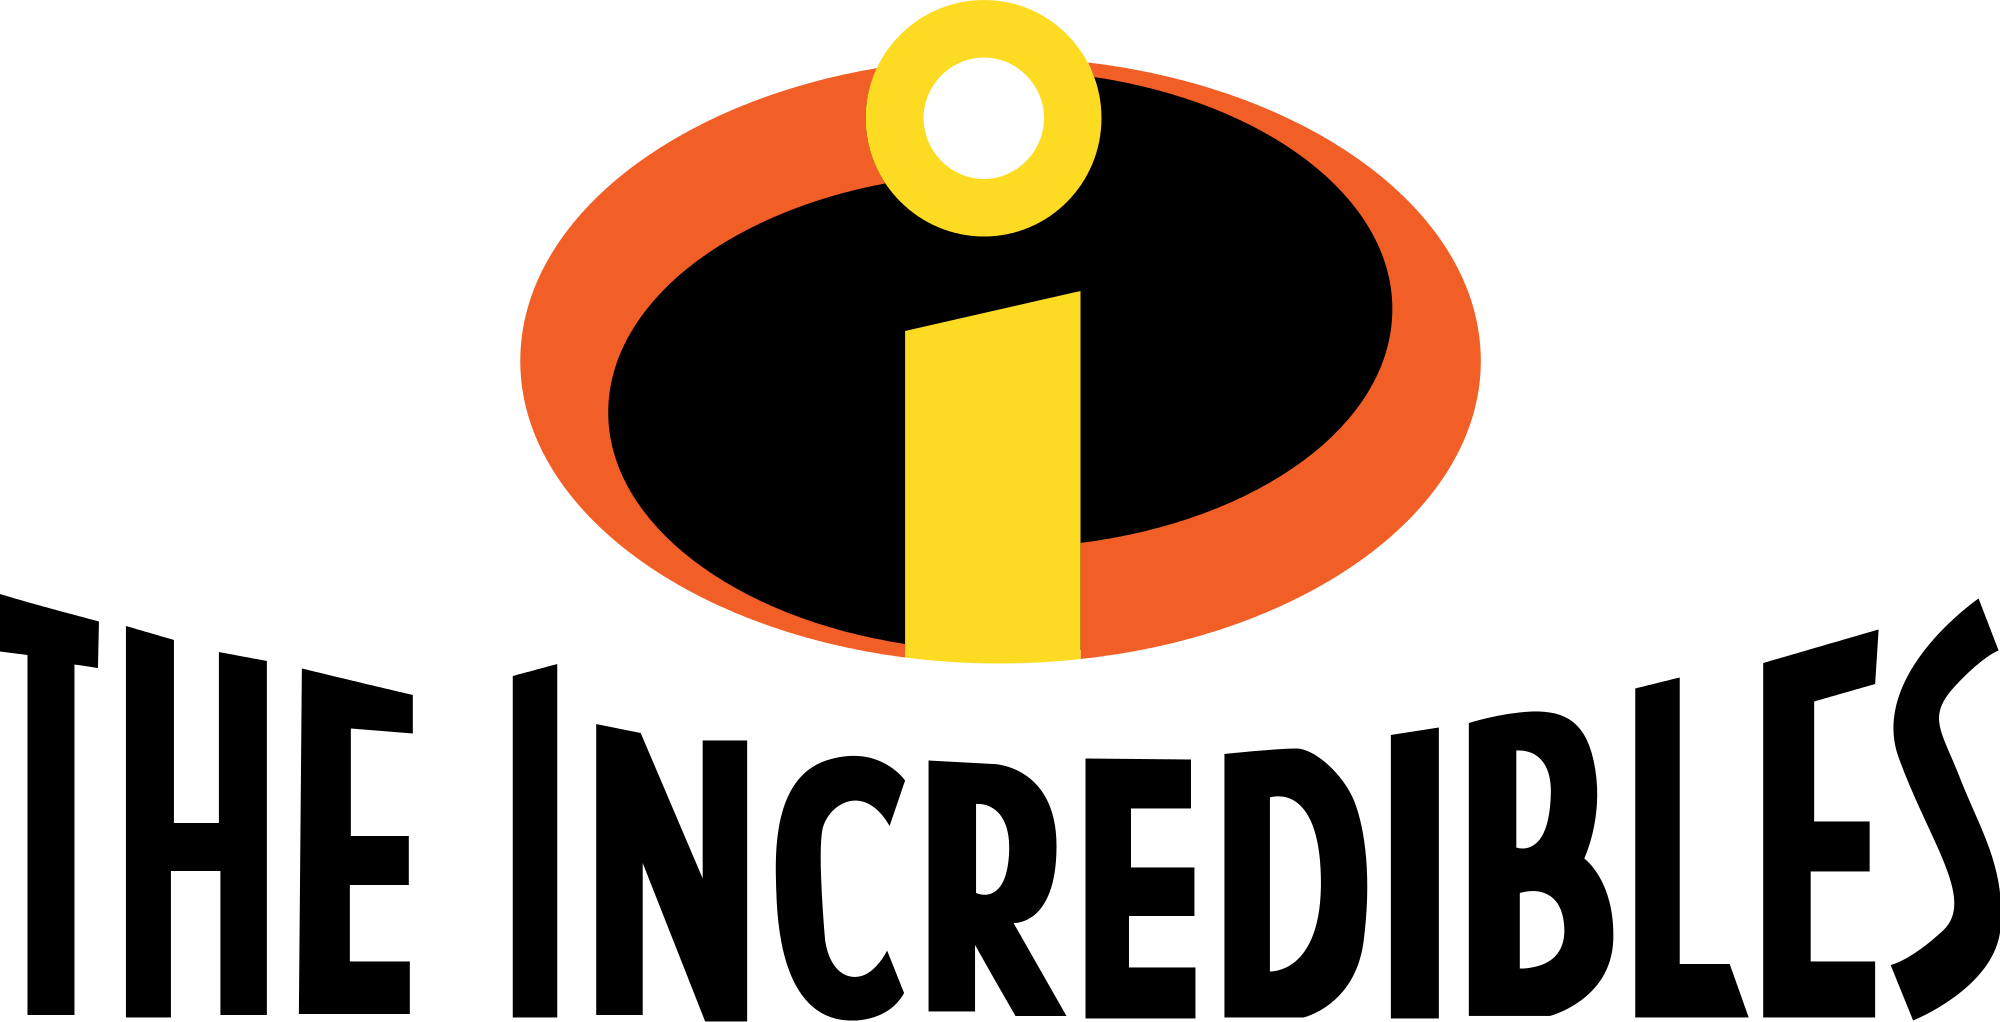 Film clipart movie symbol. Image the incredibles logo